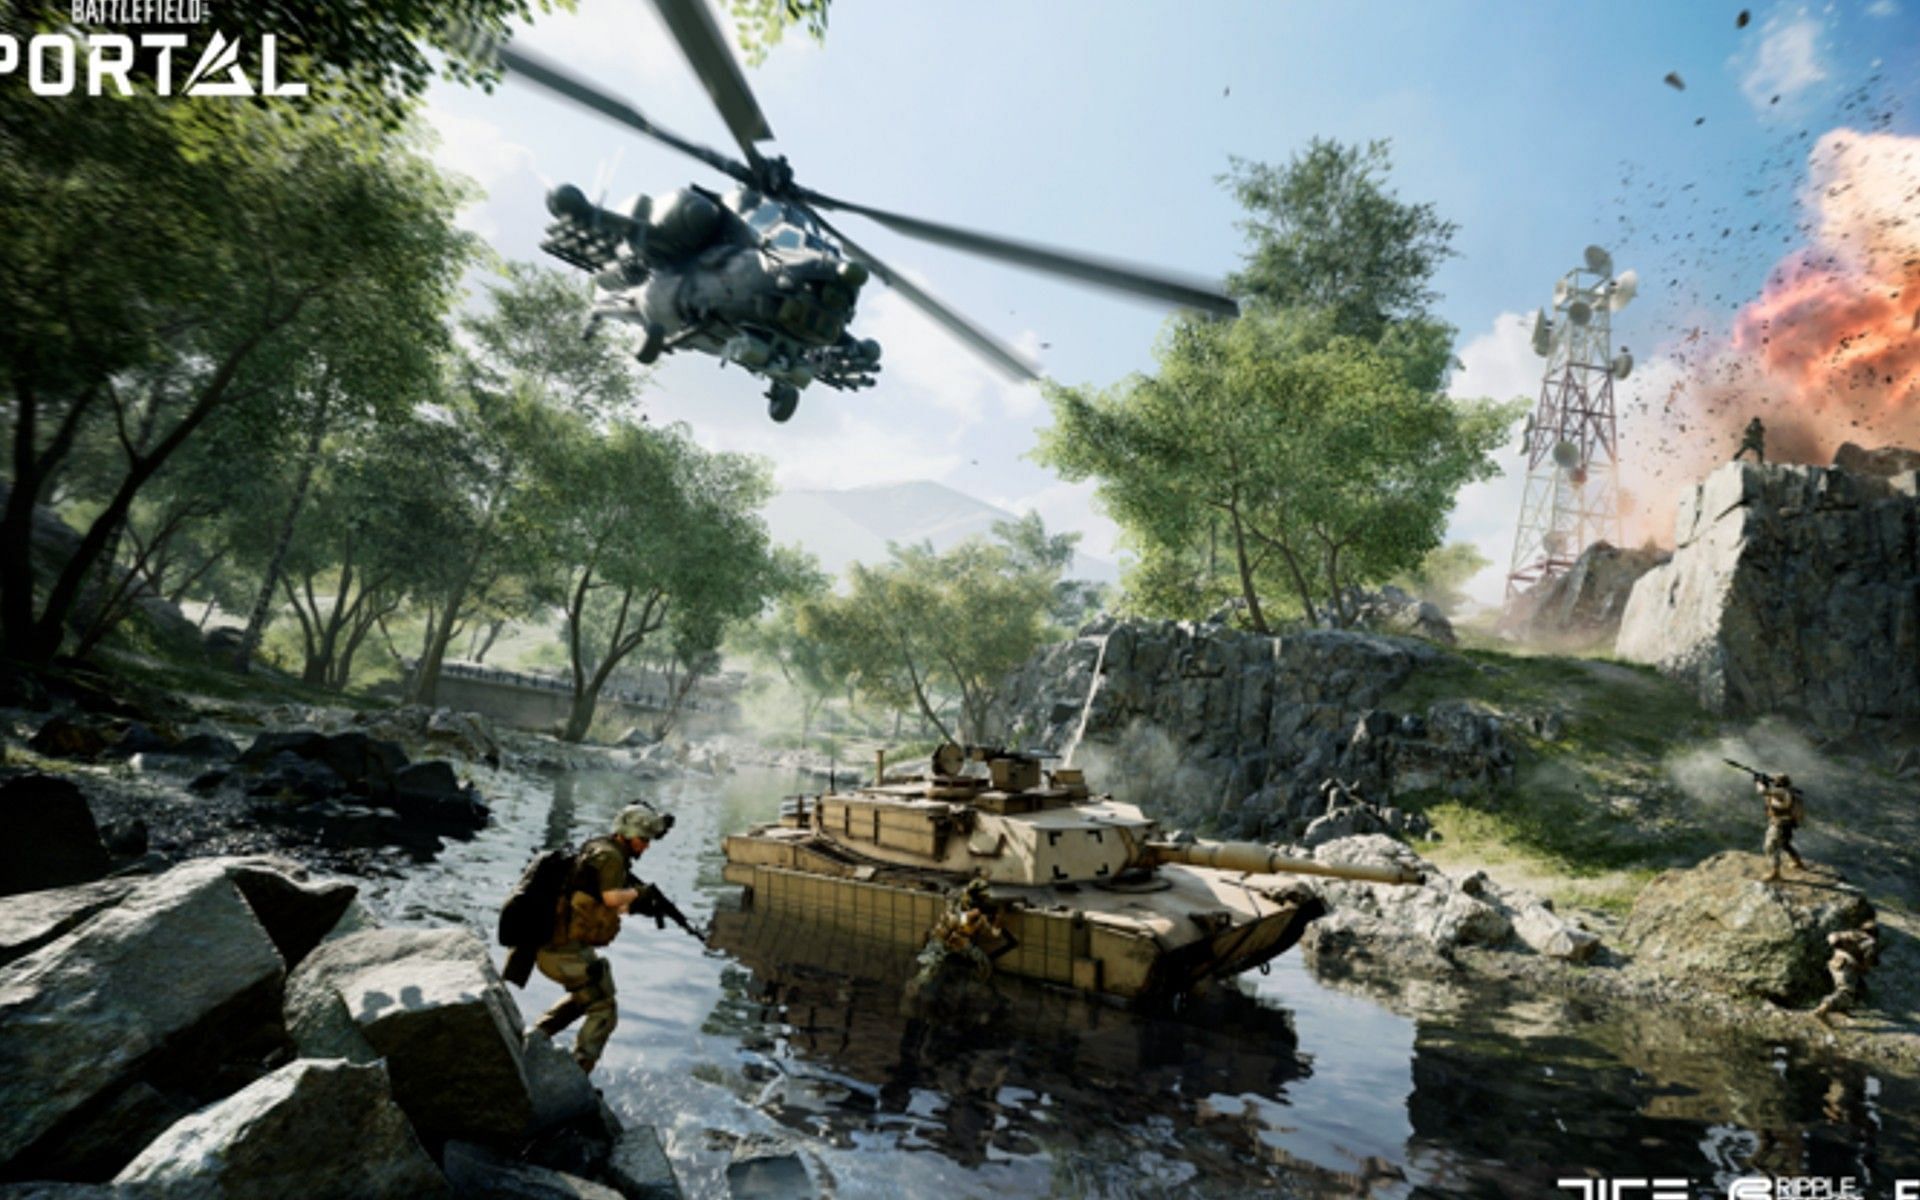 Battlefield 2042 will have a total of 13 maps, including base and classic versions. (Image via Electronic Arts)